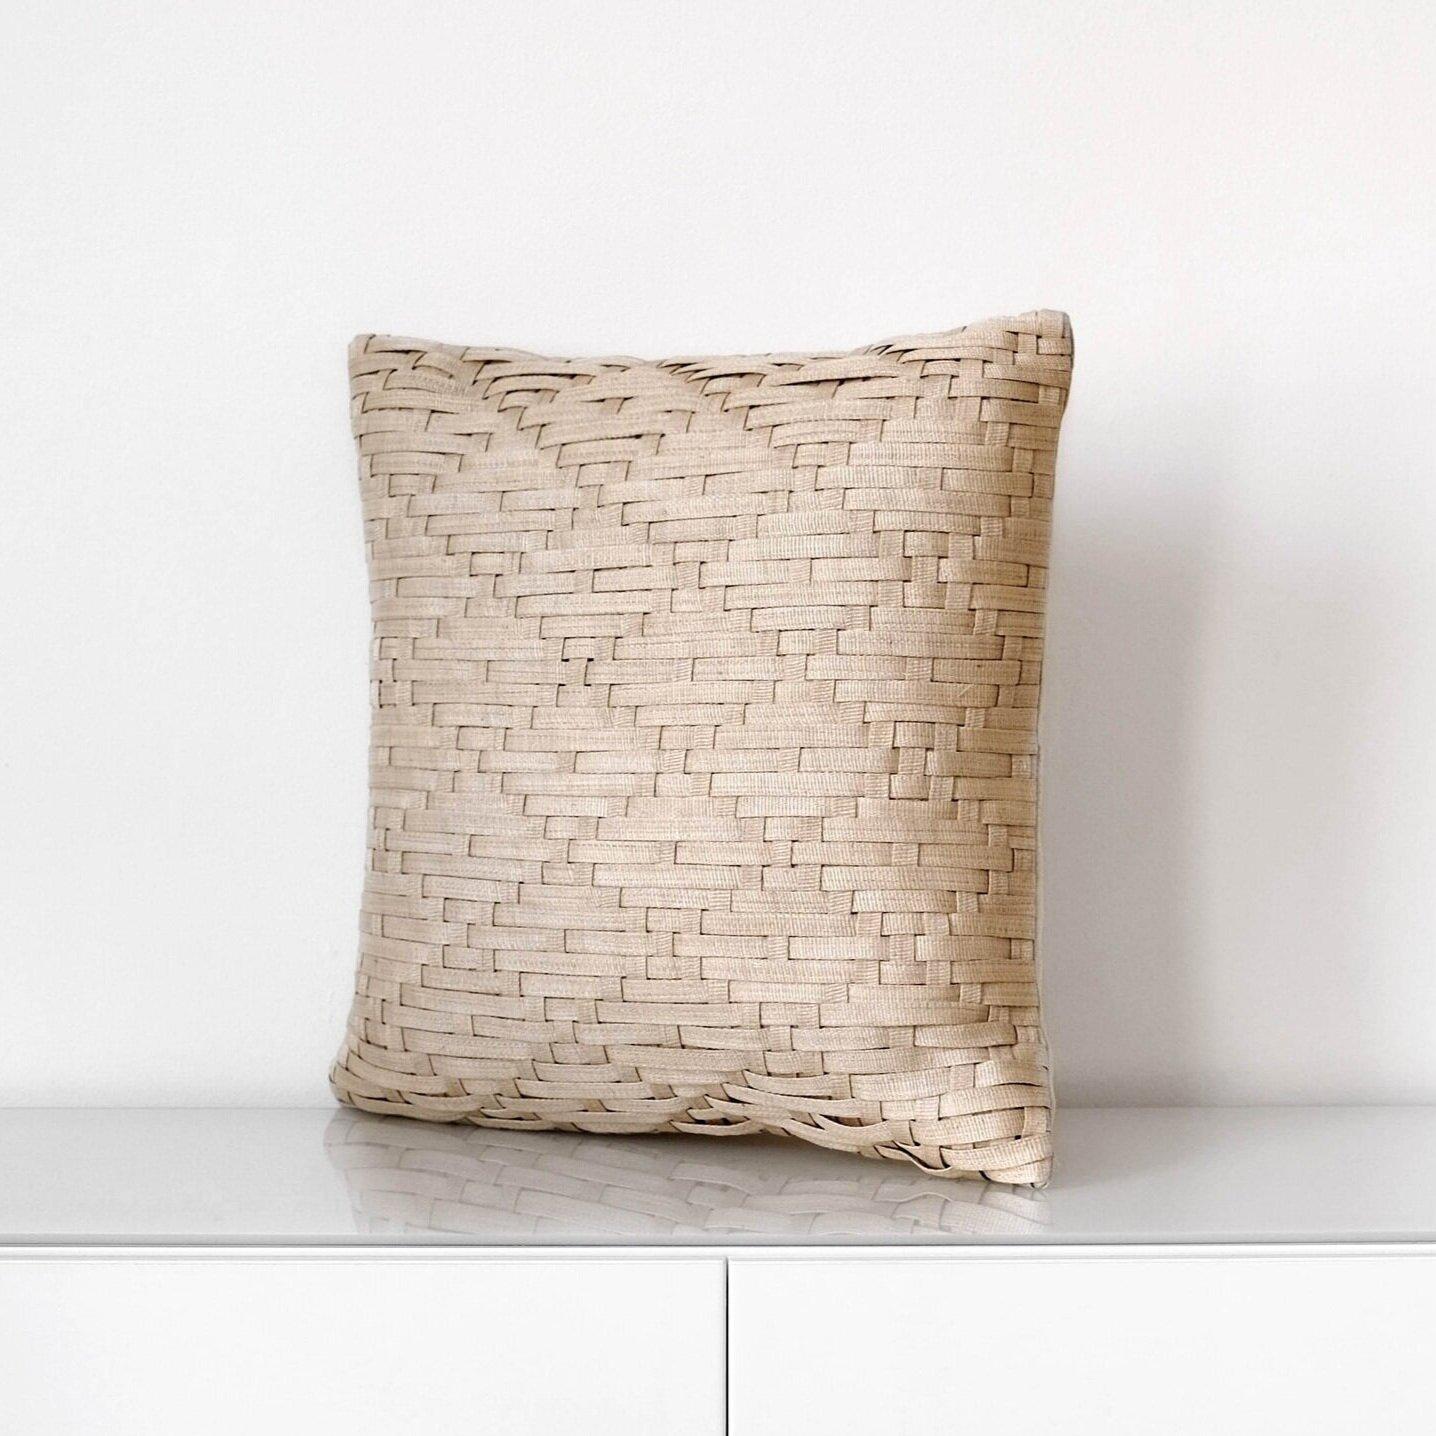 Handcrafted cushion cover made with naturally dyed and delicately woven T’nalak cloth from Abaca fibres and fastened with coconut shell buttons
Colour: light sand

50 x 50 cm
19.7? x 19.7?
Recommended cushion filler: 61 x 61 cm / 24? x